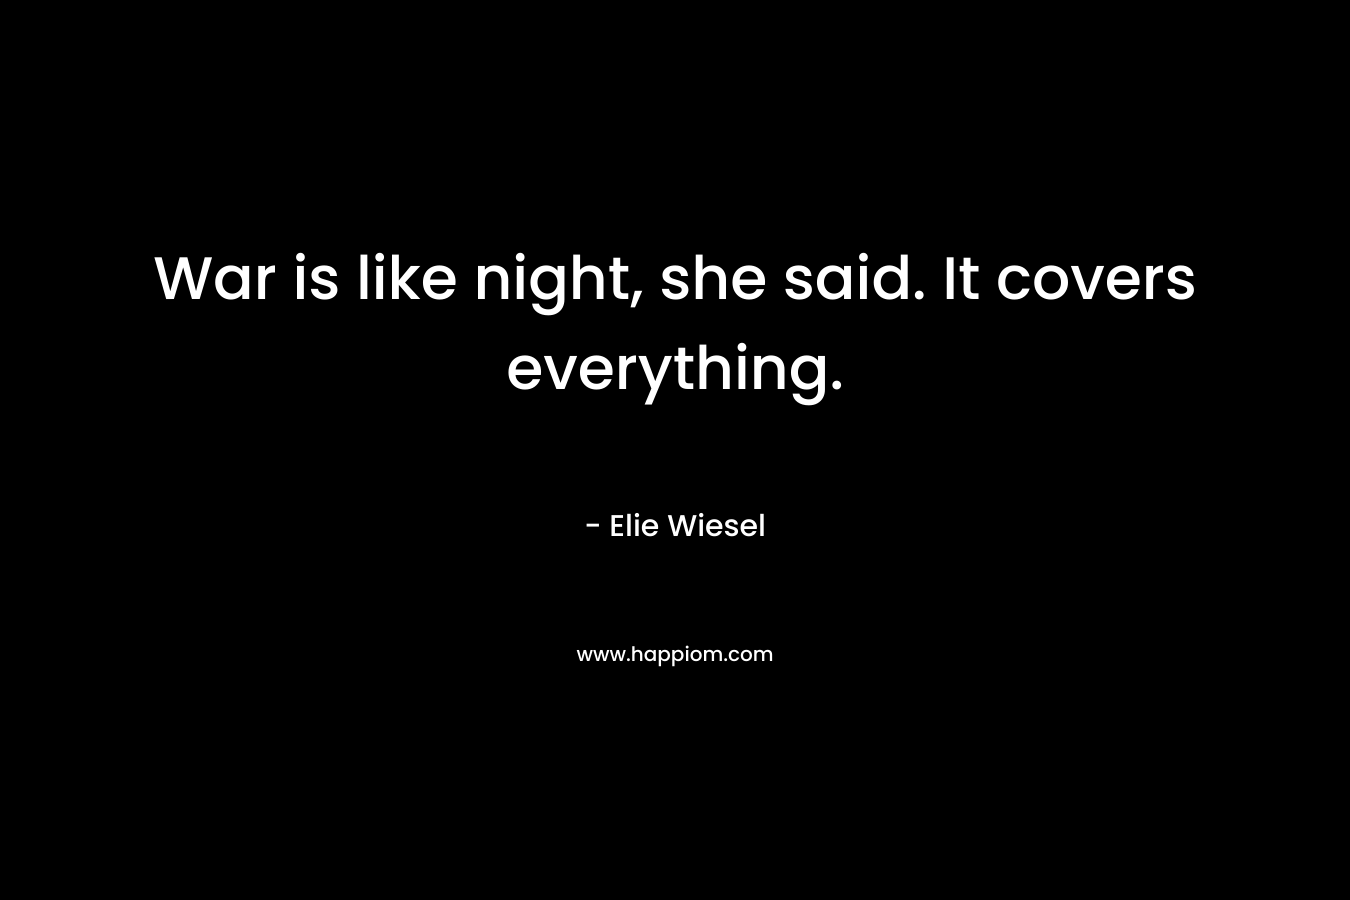 War is like night, she said. It covers everything. – Elie Wiesel